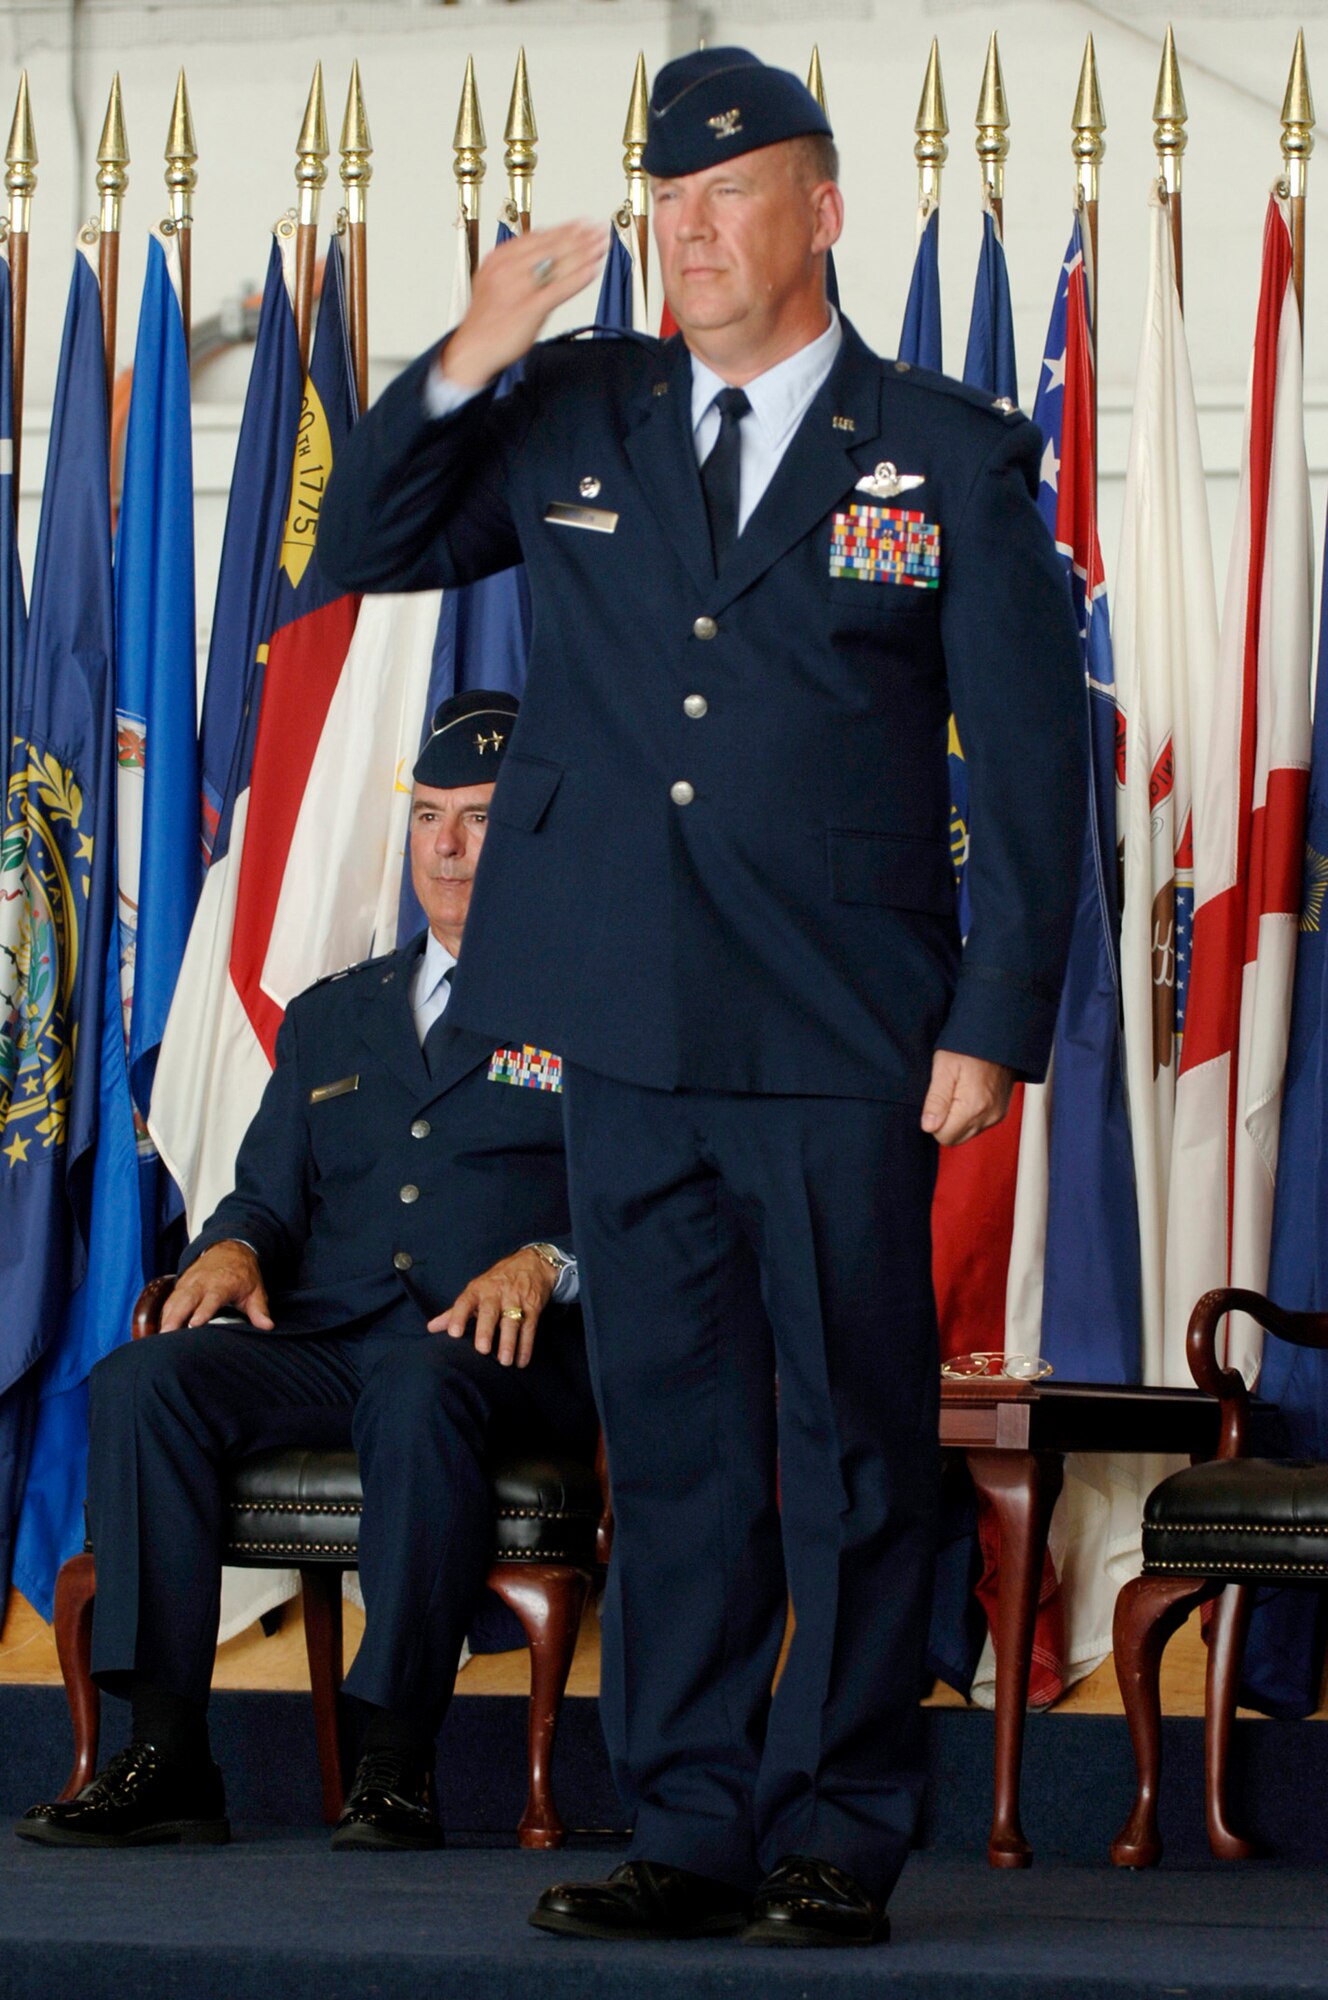 Col. Lawrence Martin salutes members of the 6th Air Mobility Wing during the wing's change of command ceremony Monday. Col. Martin accepted command of the wing during the ceremony.  (U.S. Air Force photo by Staff Sgt. Joseph Swafford)